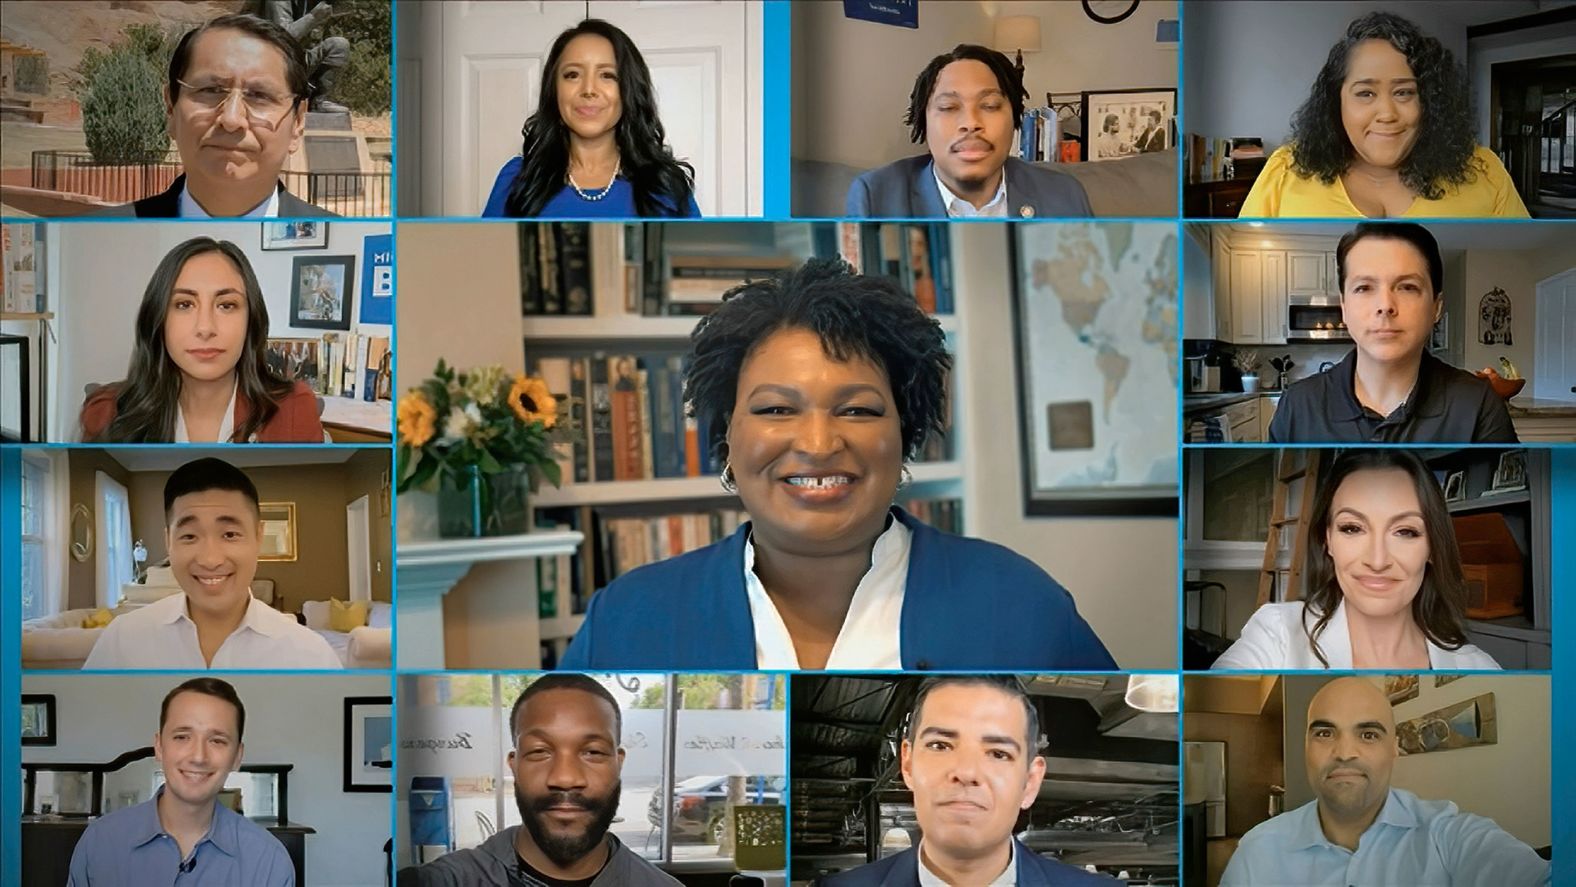 Stacey Abrams is surrounded by other rising stars of the Democratic Party as they deliver <a href="index.php?page=&url=https%3A%2F%2Fwww.cnn.com%2Fpolitics%2Flive-news%2Fdnc-2020-day-2%2Fh_b0b50c6cd6664b51ce60e4934e1d1dc9" target="_blank">a joint keynote address</a> to start Tuesday's program.